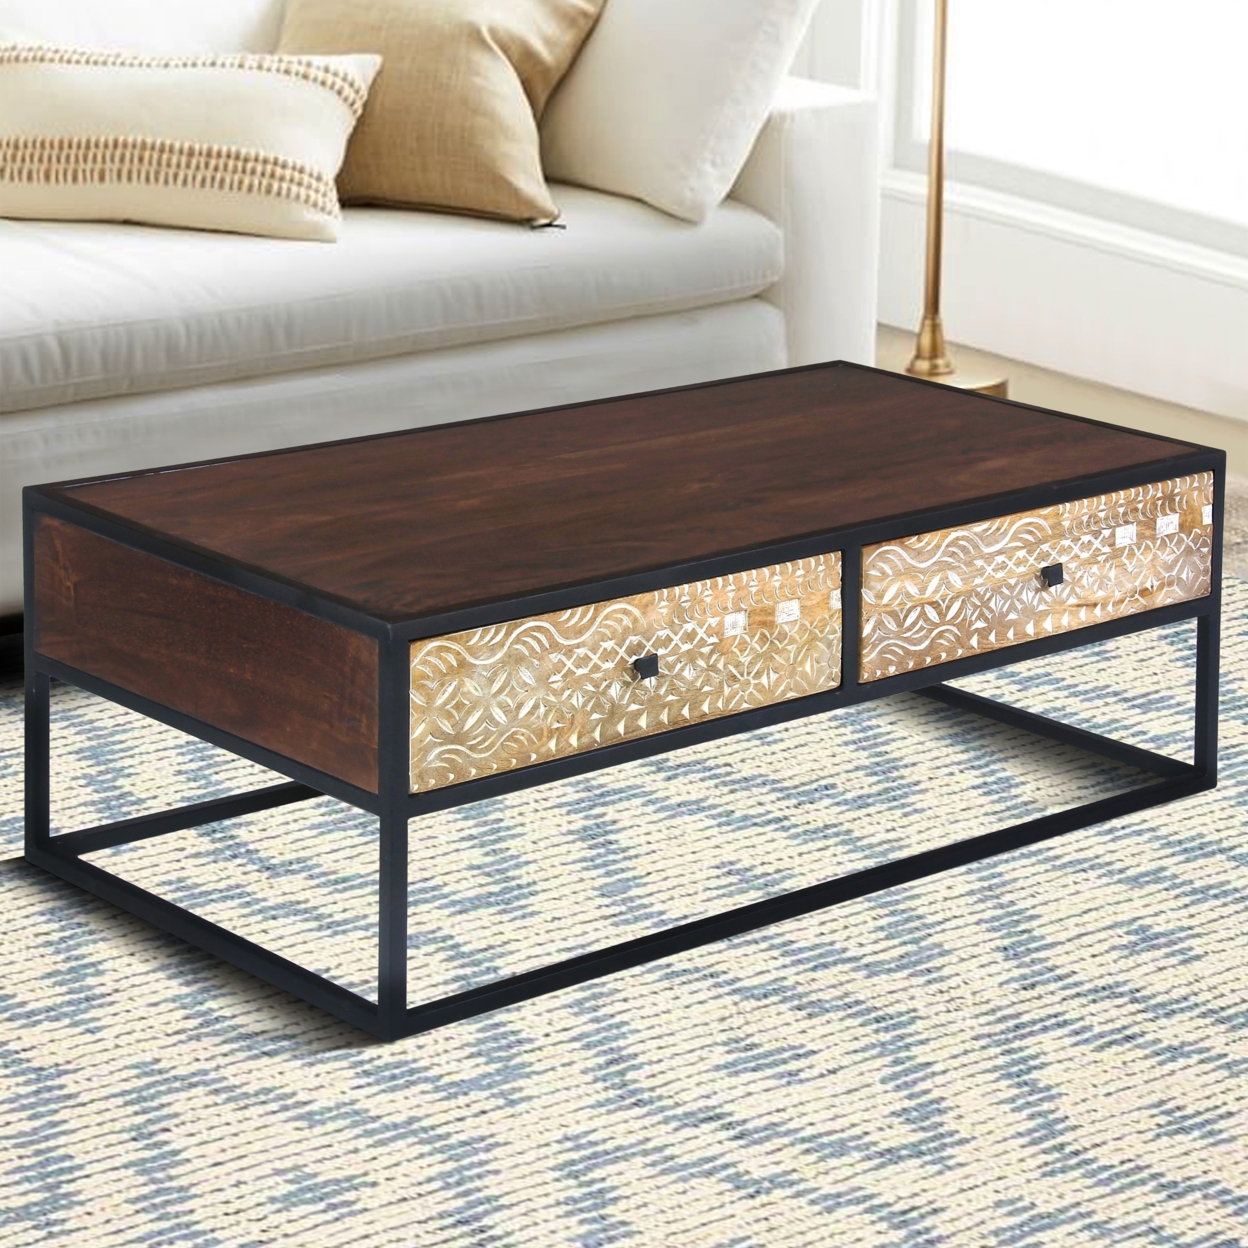 45 Inch Carson Rectangular Mango Wood Coffee Table With Metal Frame And 2 Drawers, Brown And Black- Saltoro Sherpi